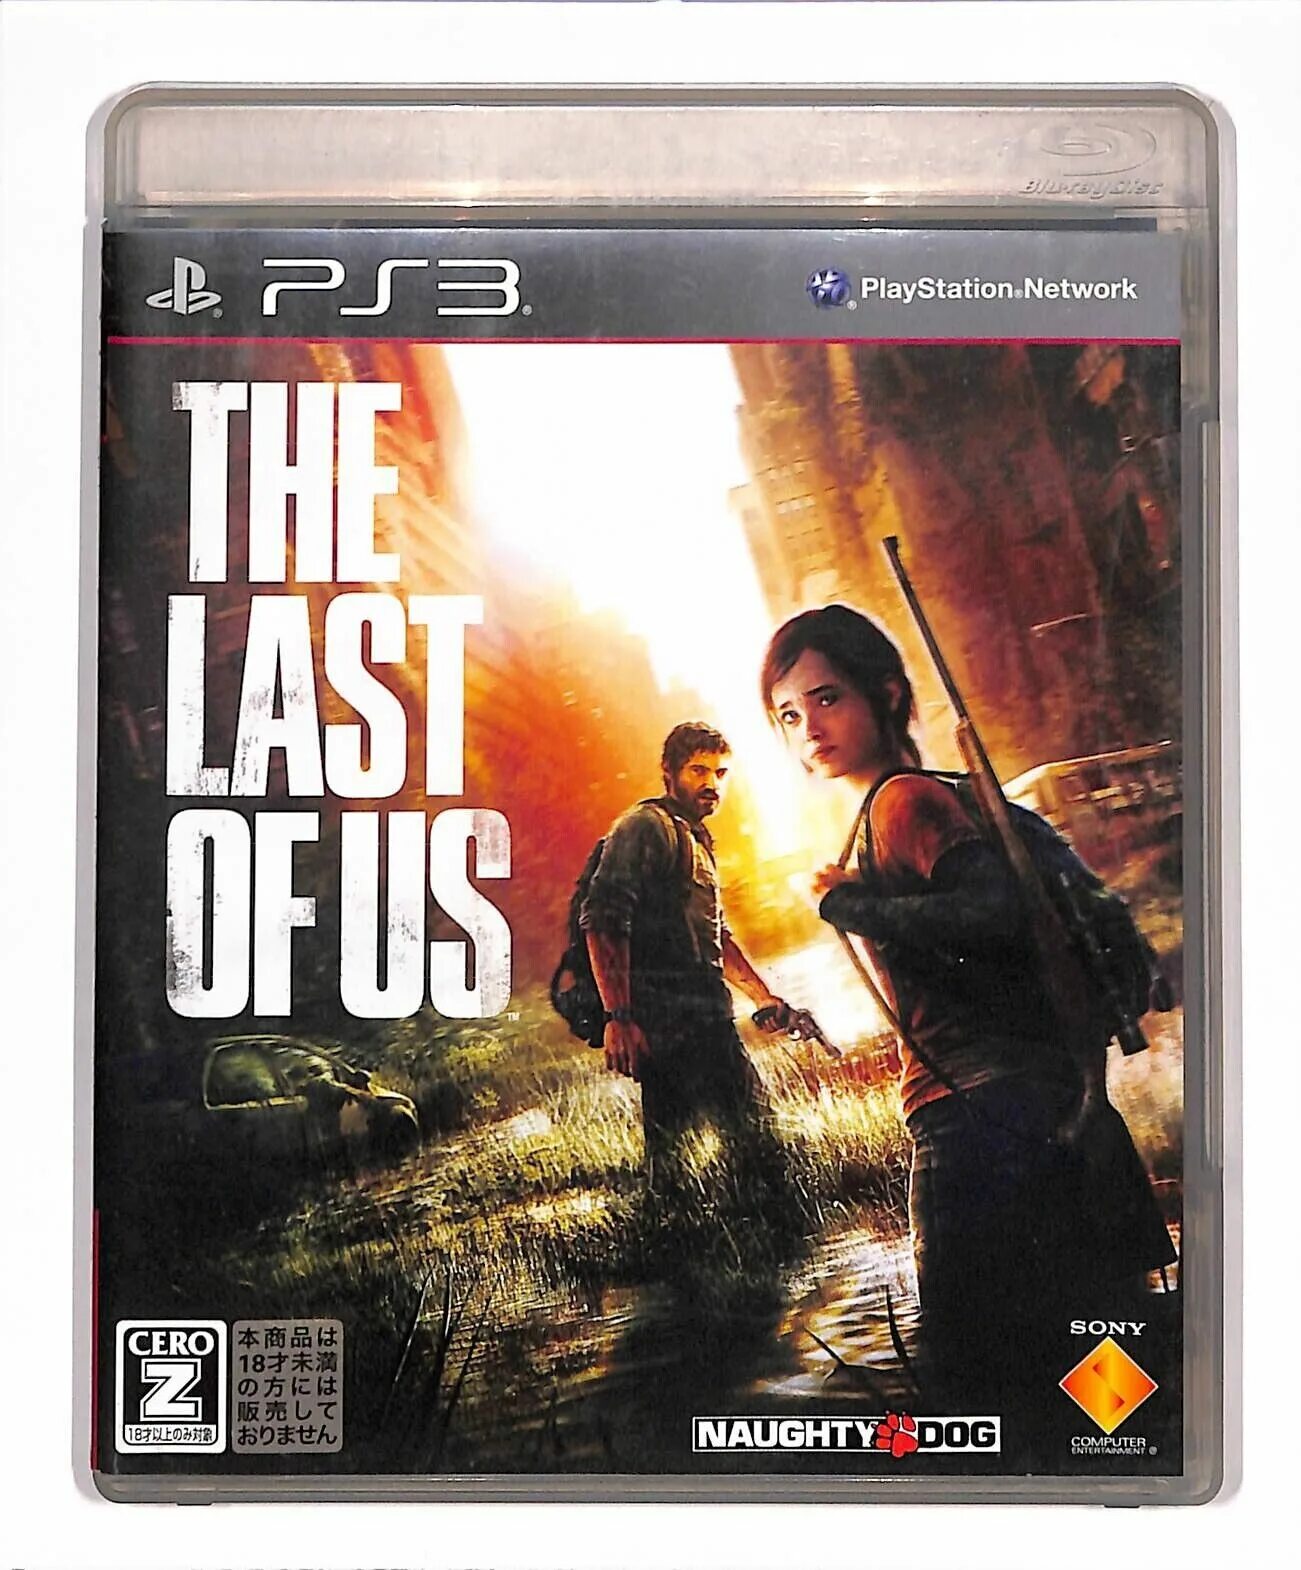 The last of us обложка ps3. The last of us 1 диск на ПС 3. The last of us 2013 обложка. The last of us на пс3. Игра фаст оф фаст